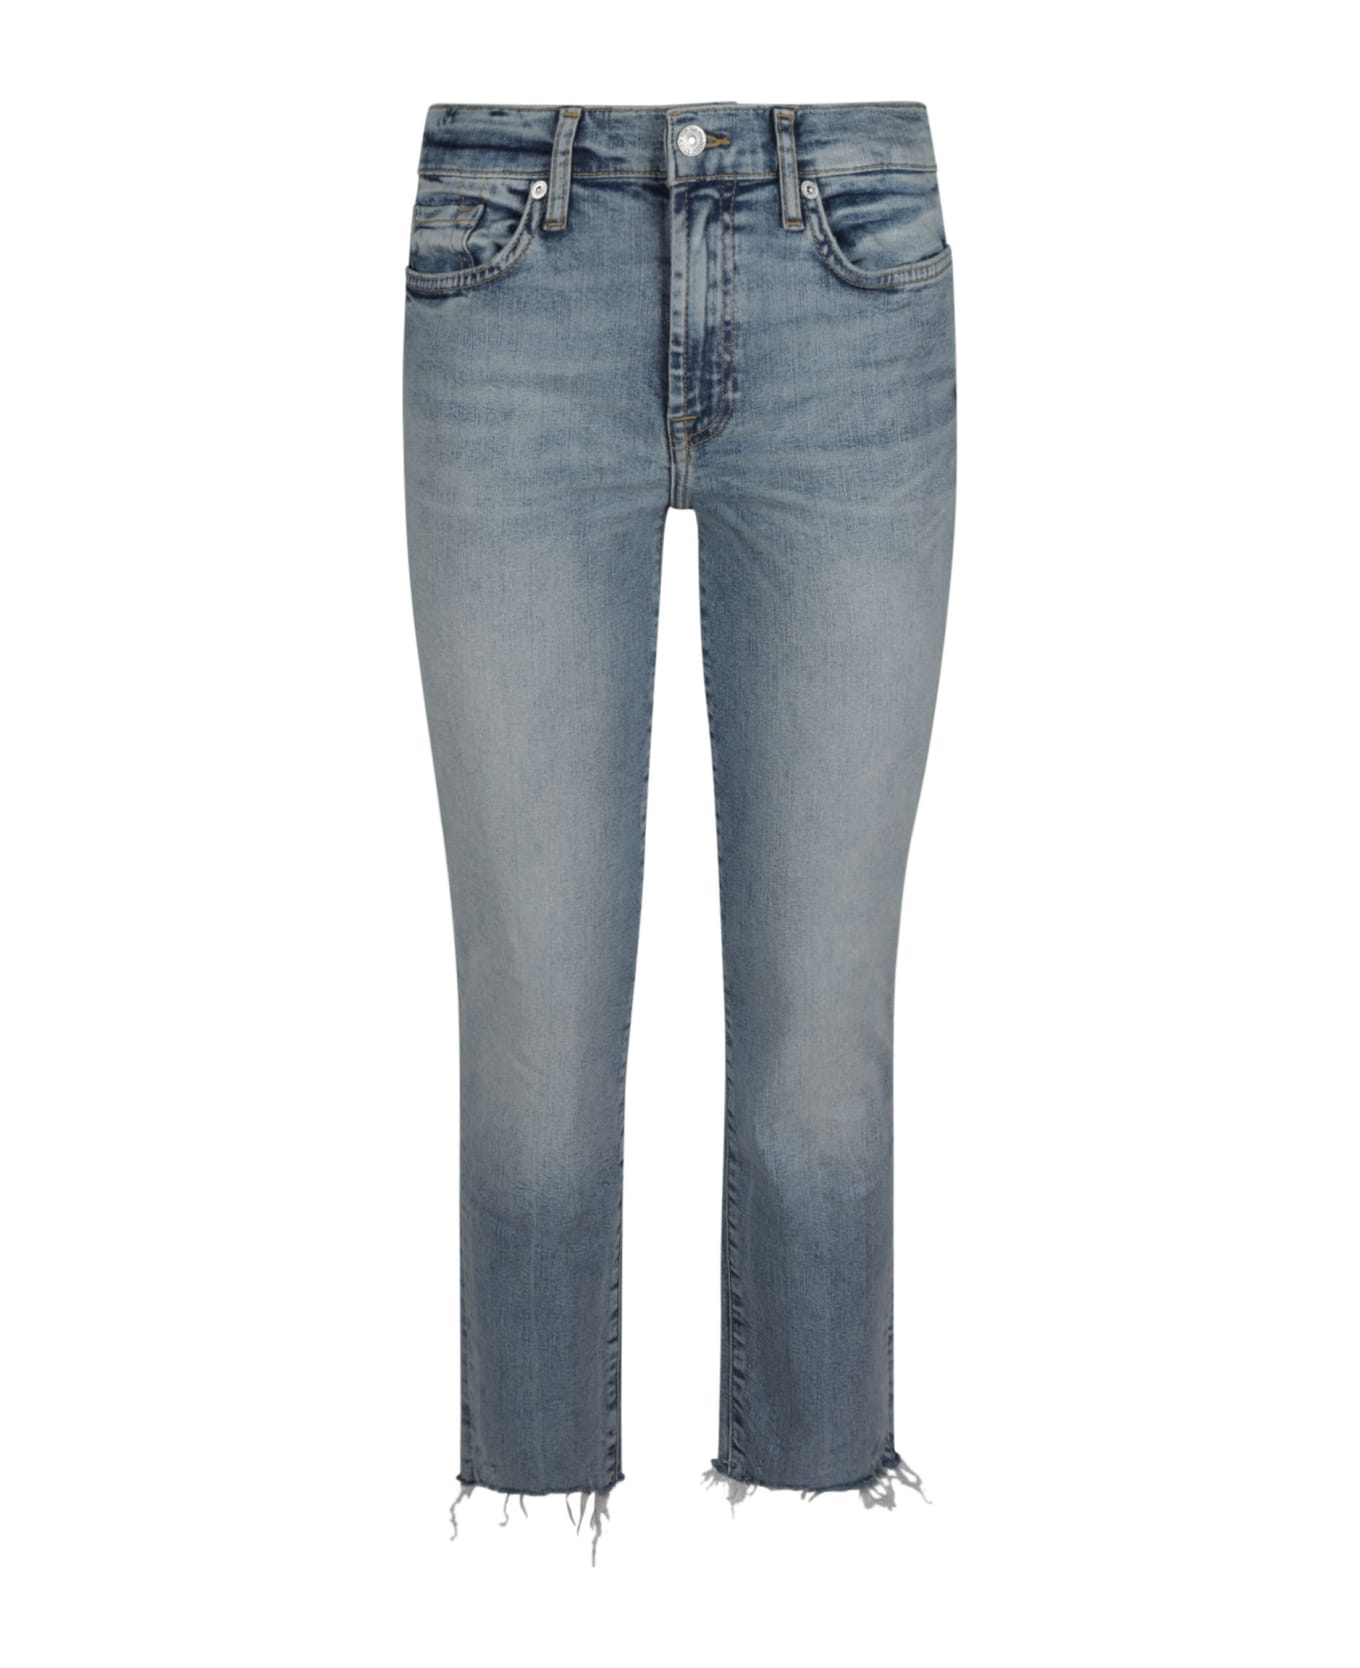 7 For All Mankind Roxanne Ankle Jeans - Blue Denim